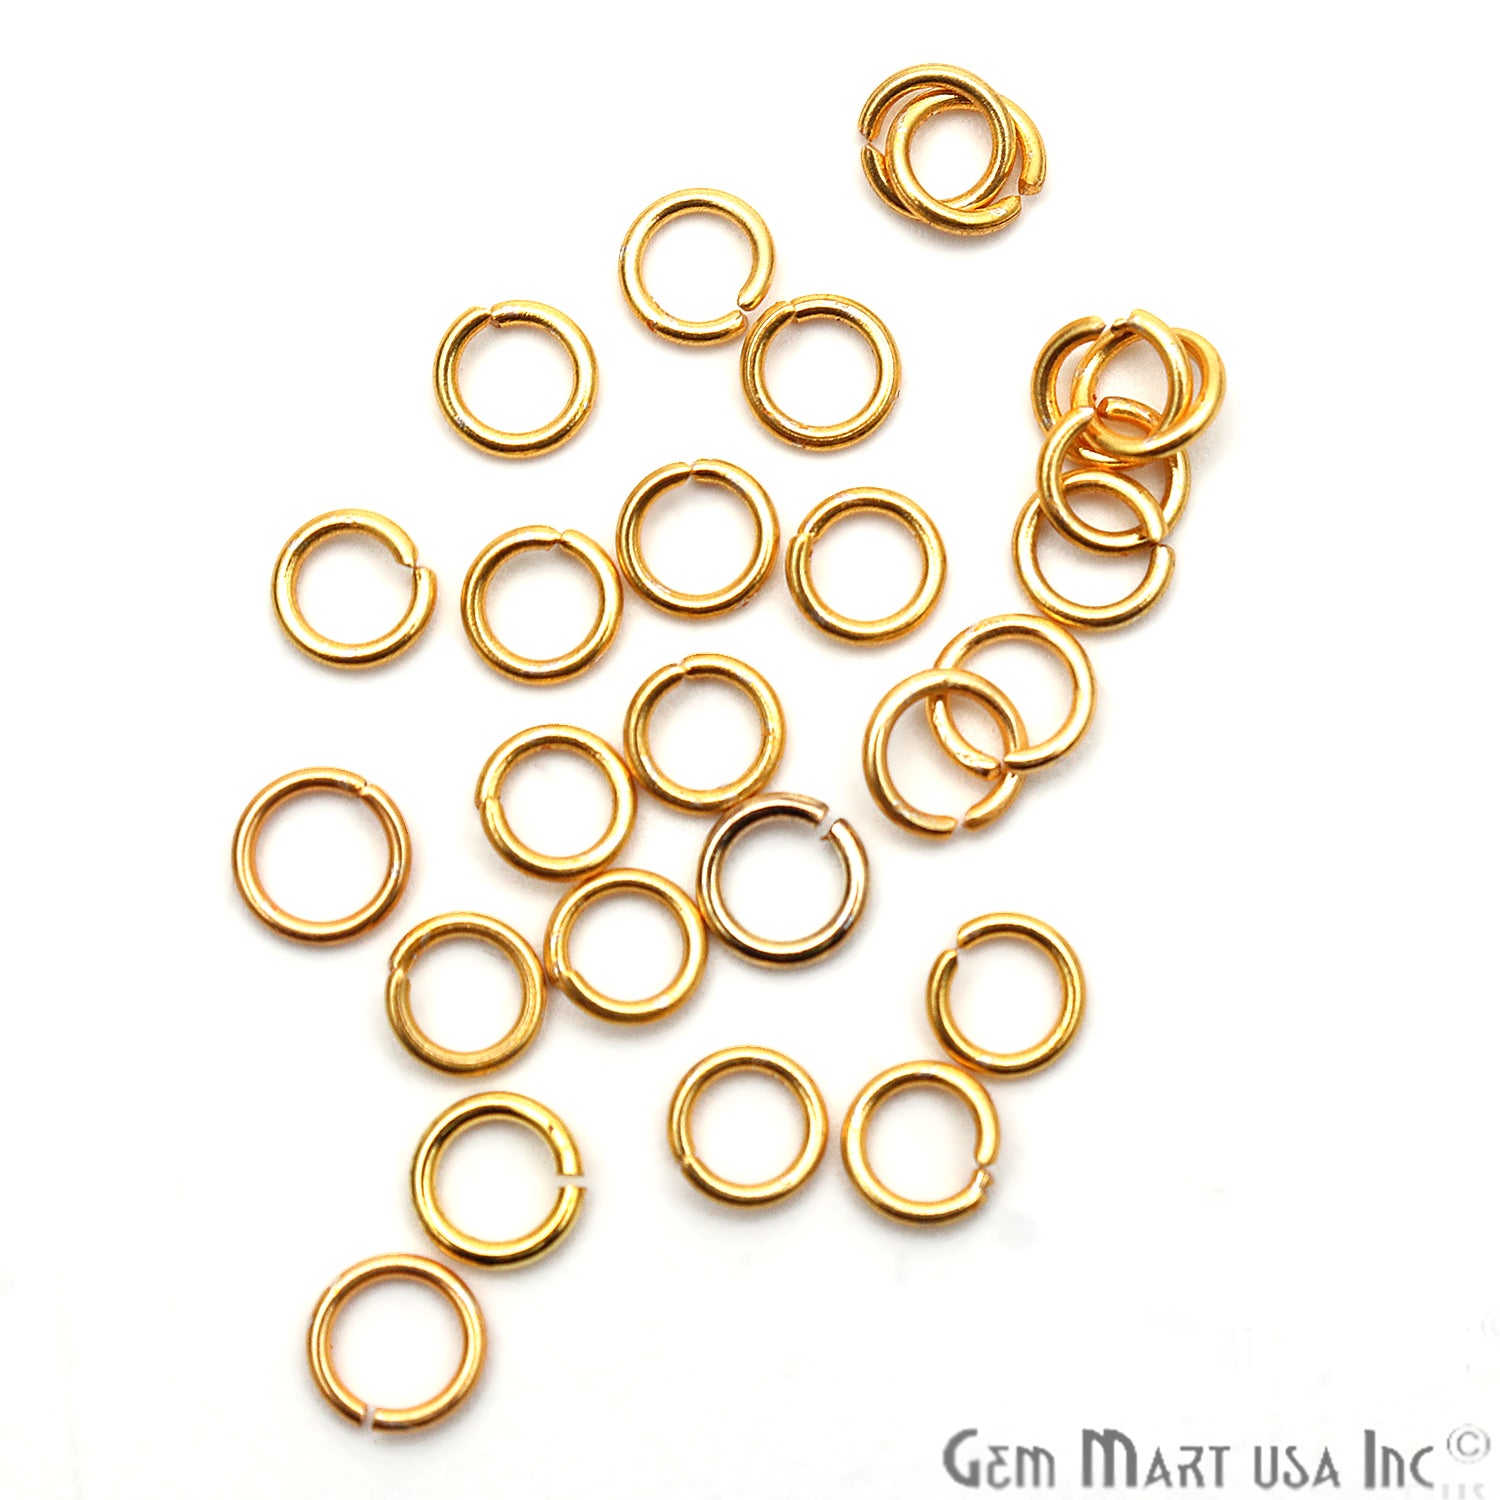 10pc Lot Open Jump Rings 6mm Gold Plated Finding Jewelry Charm - GemMartUSA